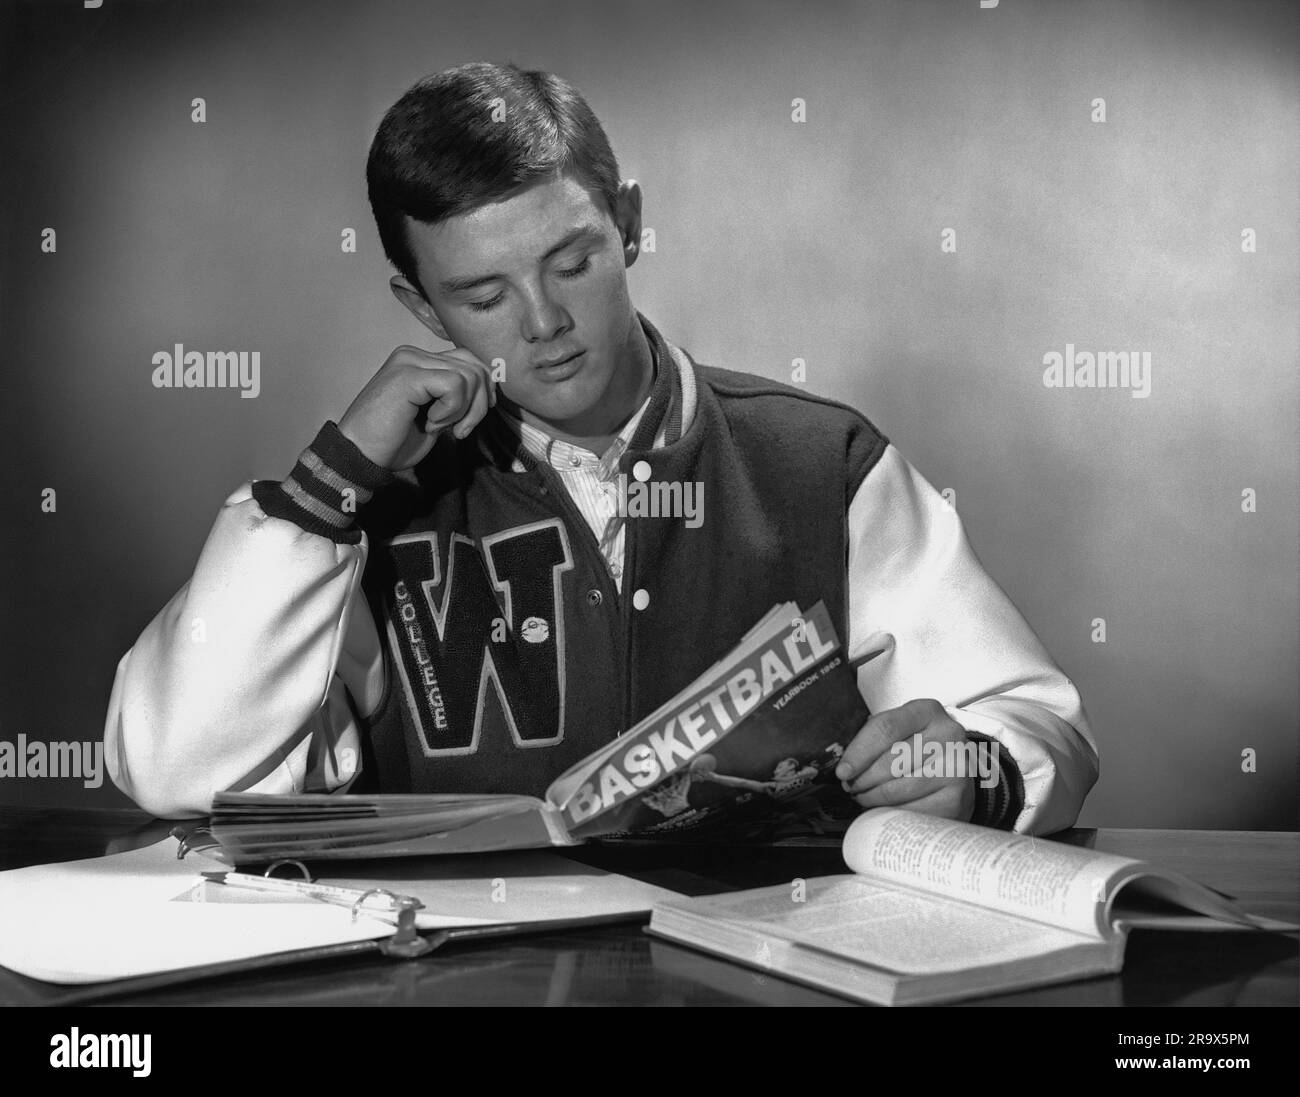 Teenage college boy in sports jacket with his college logo W as takes a minute and pauses from doing schoolwork to read a sports/basketball magazine Stock Photo